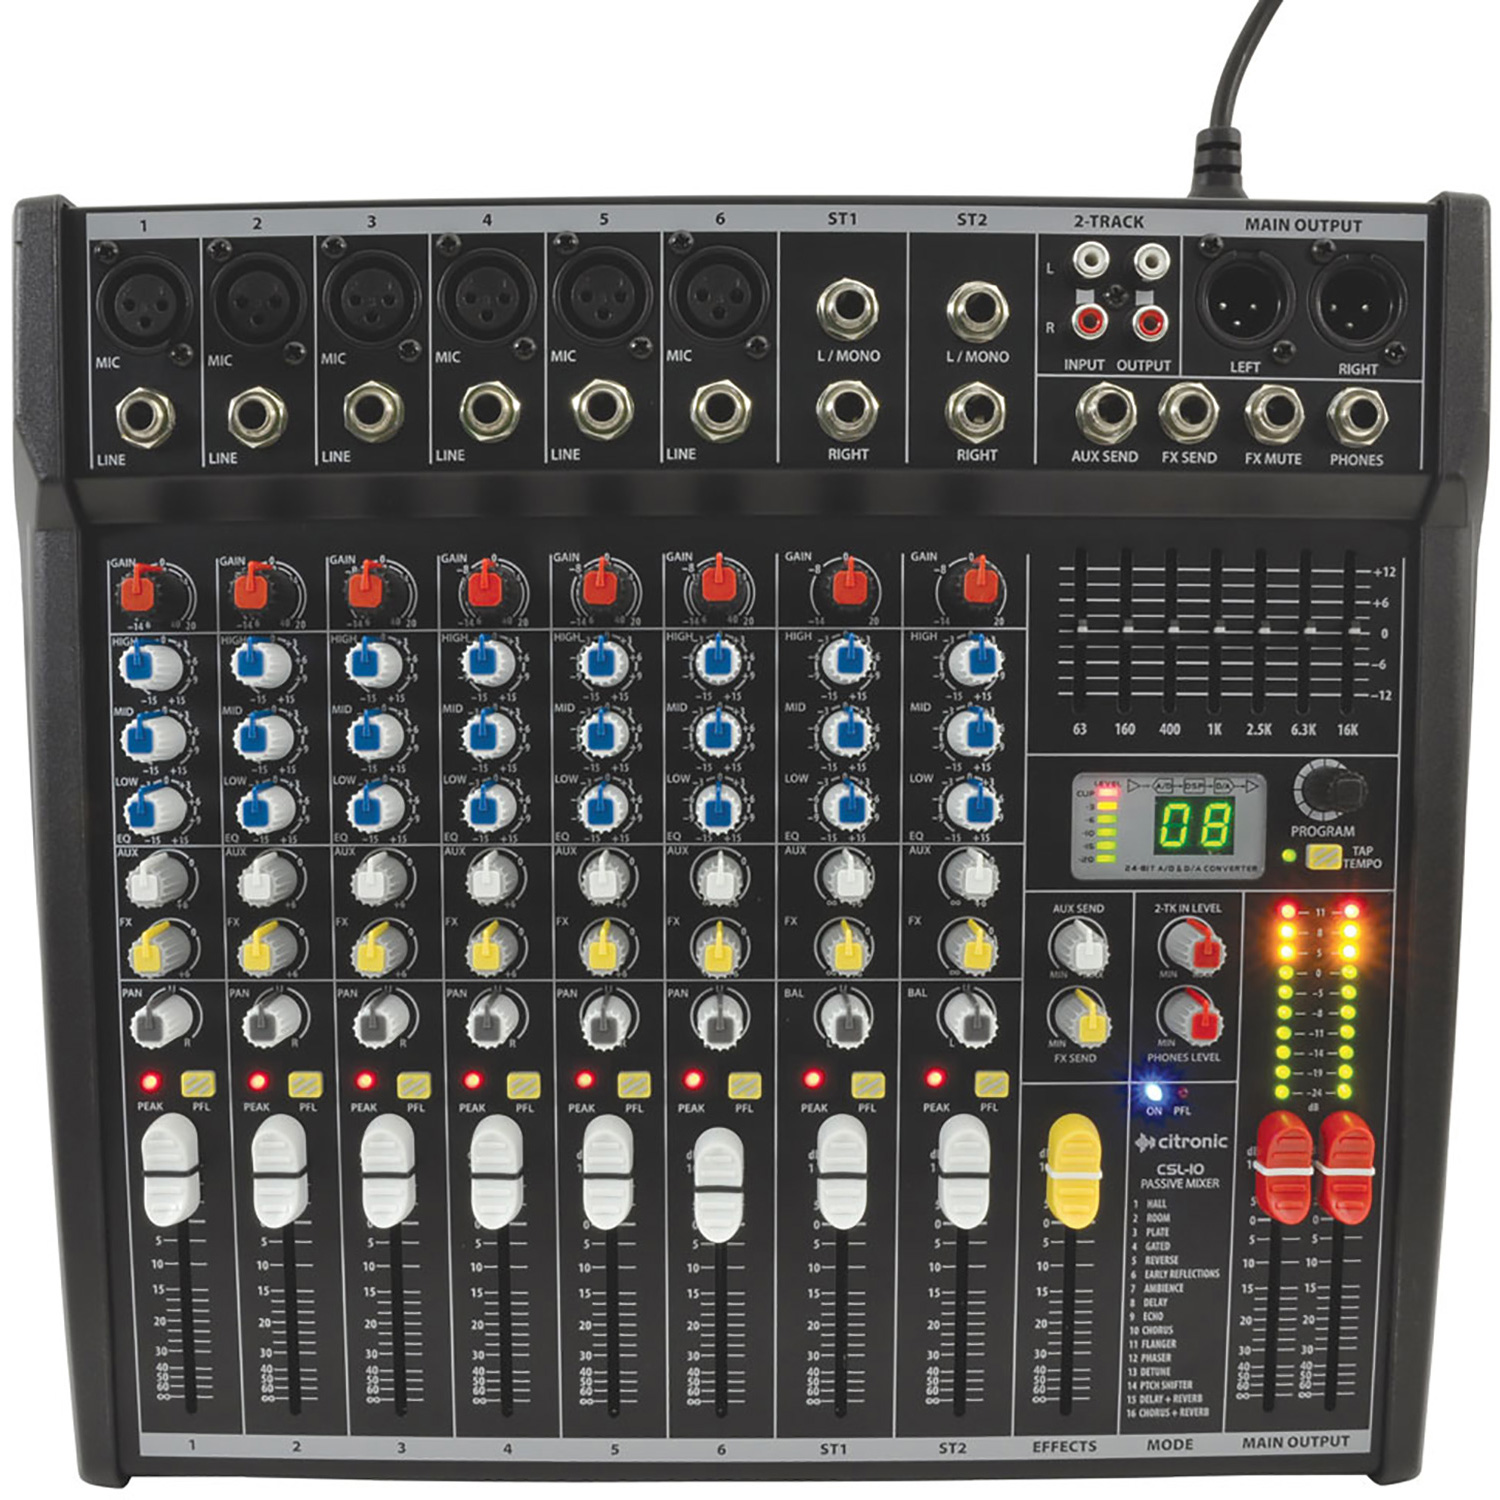 CSL Series Compact Mixing Consoles with DSP CSL-10 Mixing Console 10 input